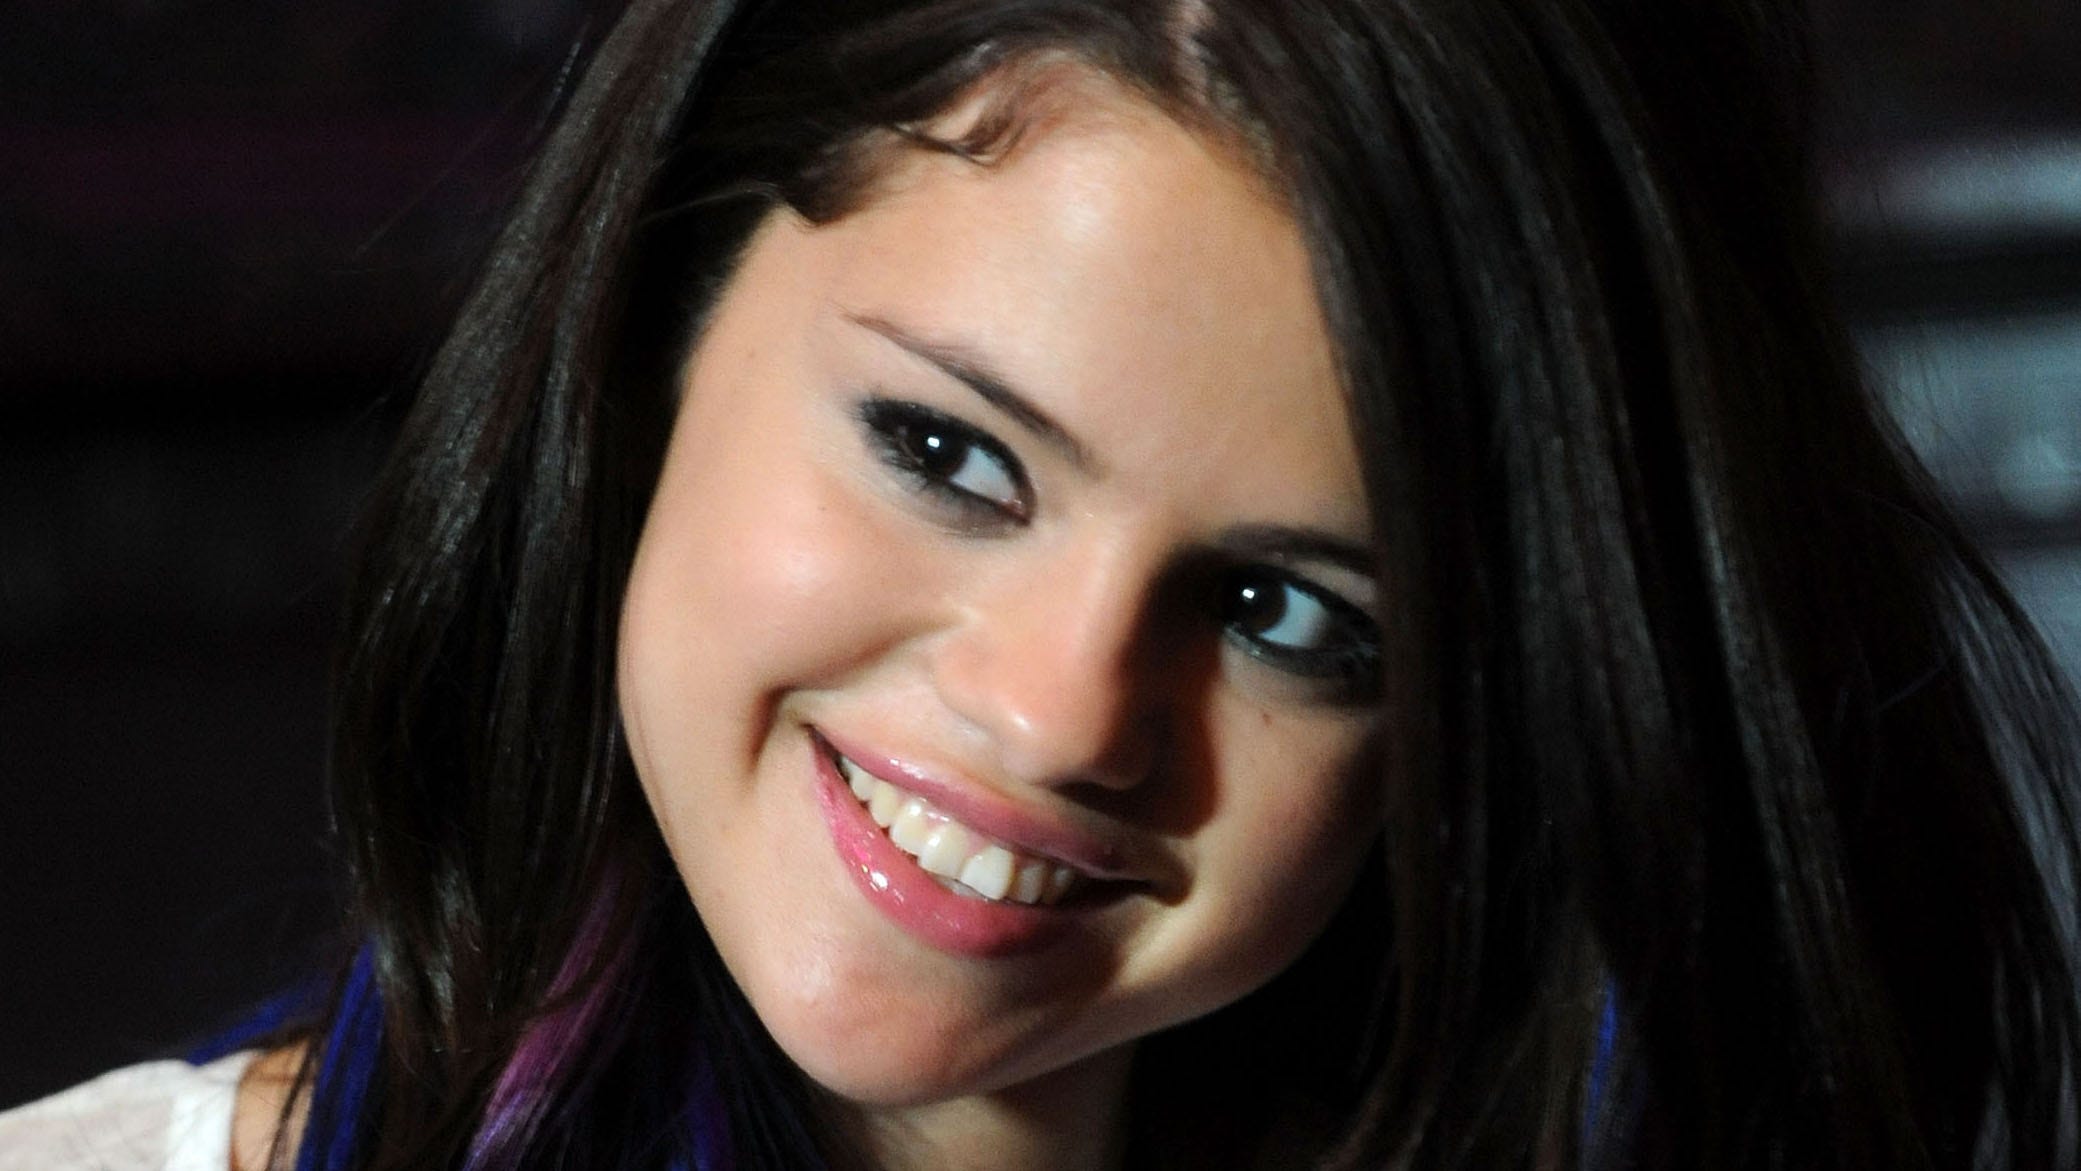 Selena Gomez Lands Role in New Film 'Parental Guidance Suggested'...